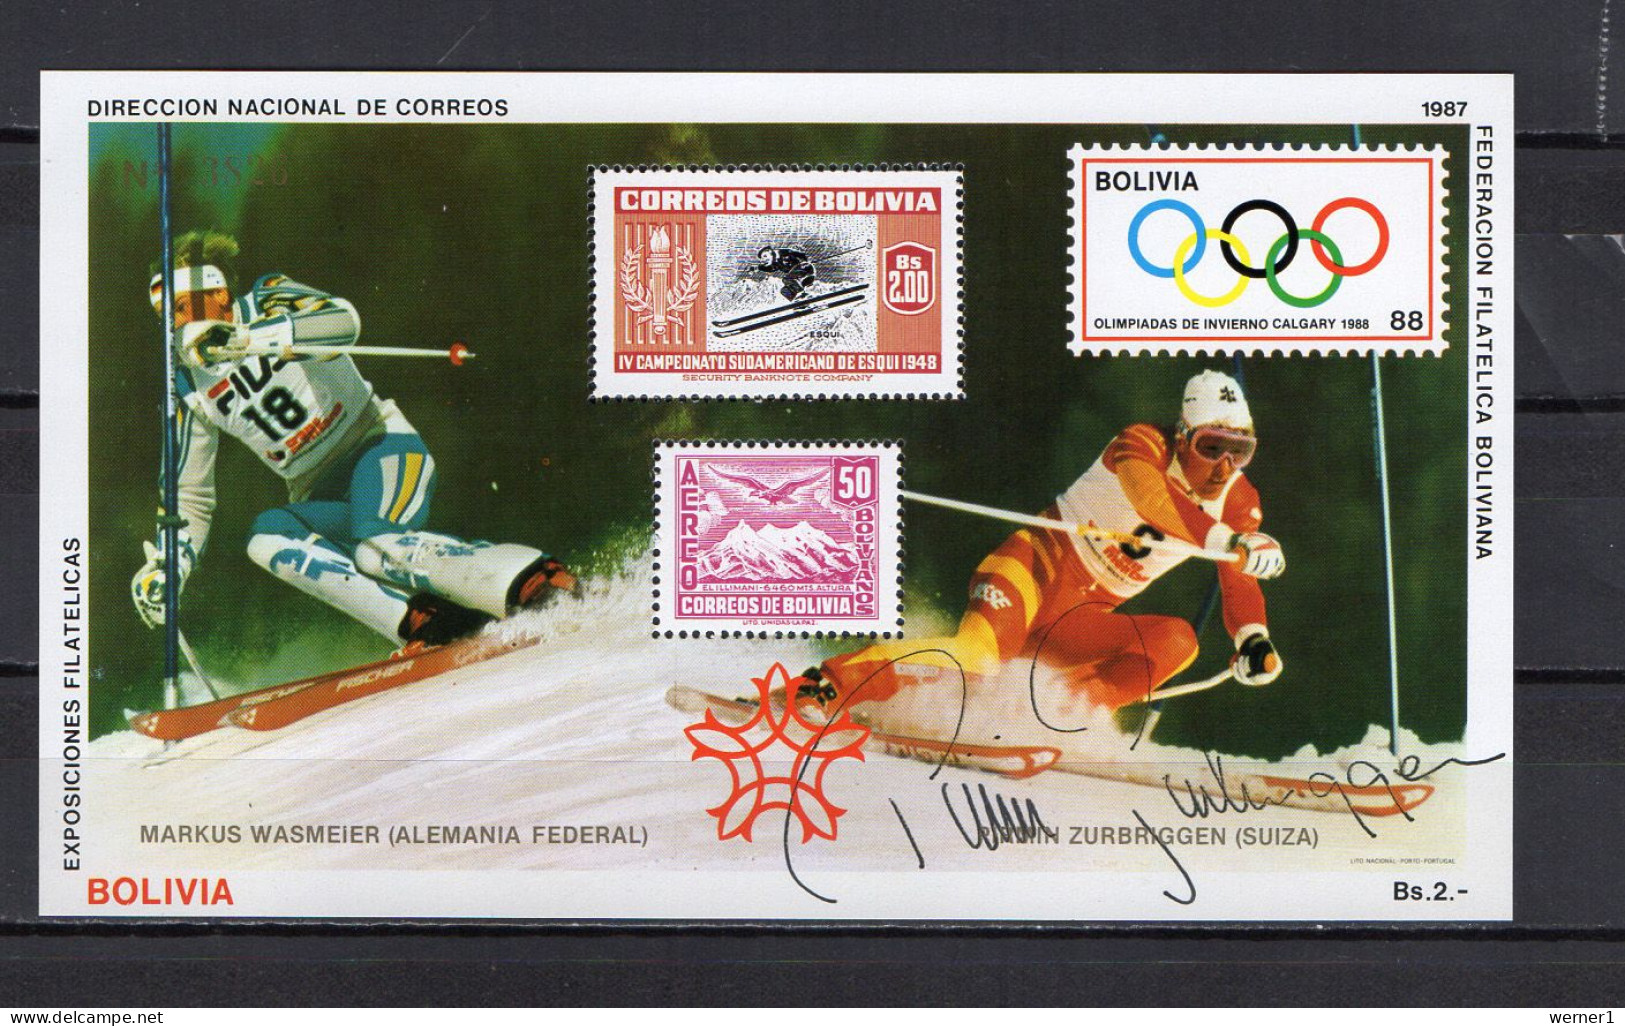 Bolivia 1987 Olympic Games Calgary S/s With Signature Of Pirmin Zurbriggen MNH -scarce- - Hiver 1988: Calgary